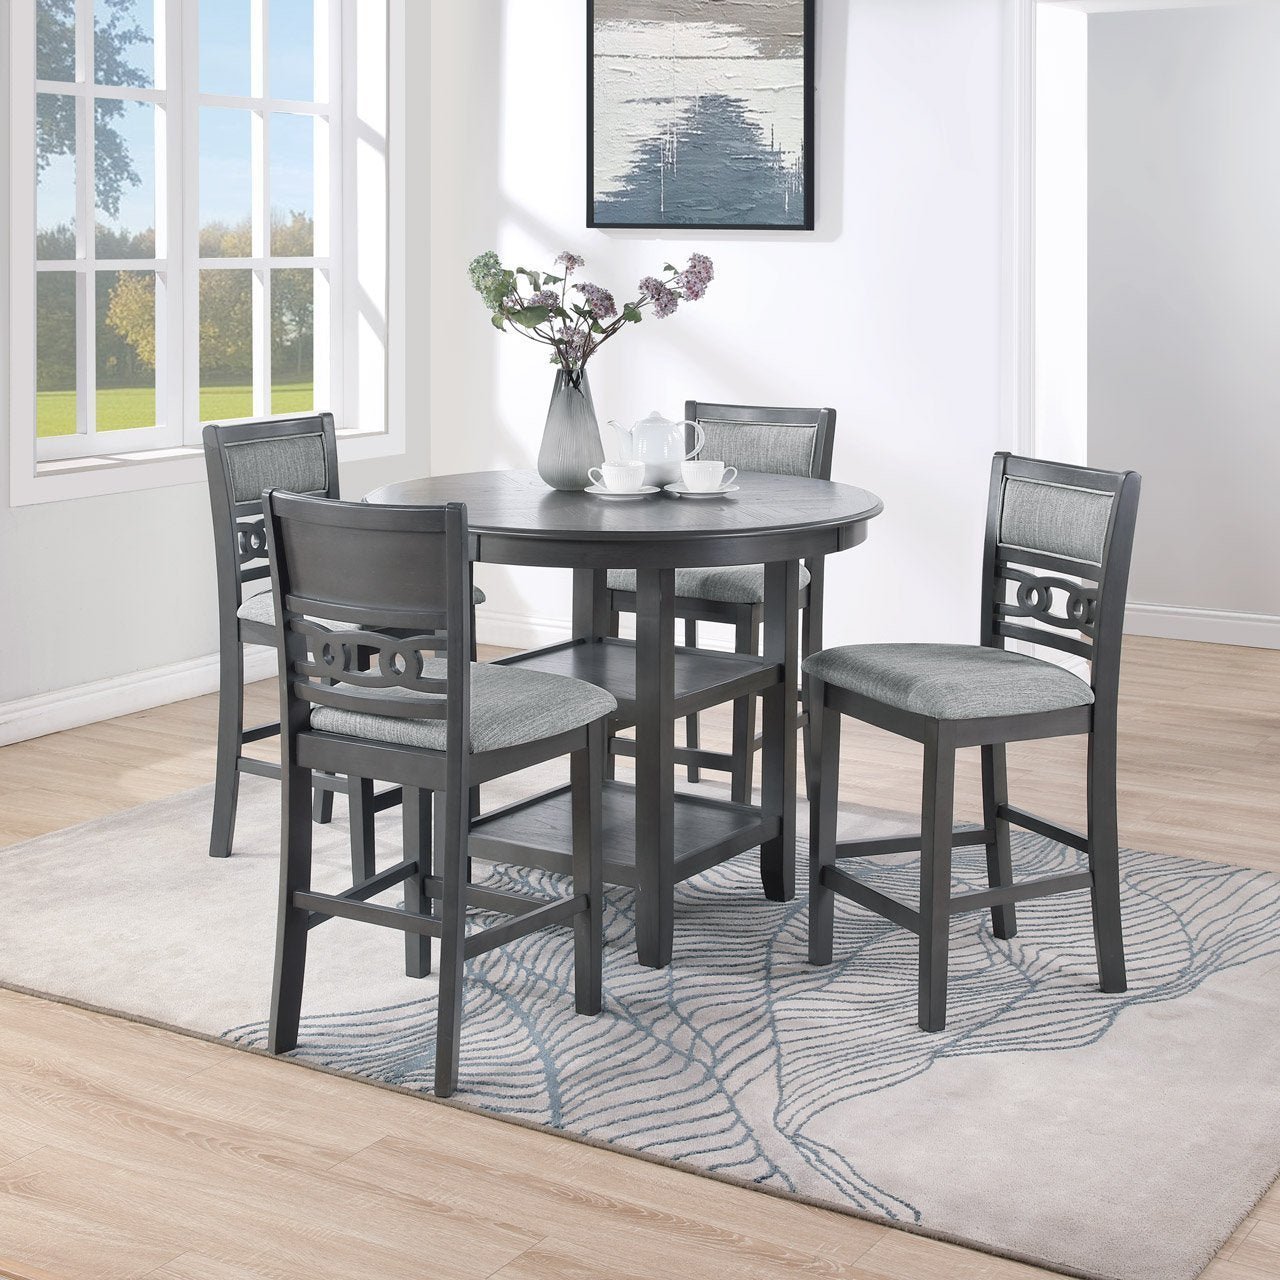 5-piece-Outdoor-Counter-Height-Dining-Set,-Gray-Two-tone-Kitchen-&-Dining-Furniture-Sets